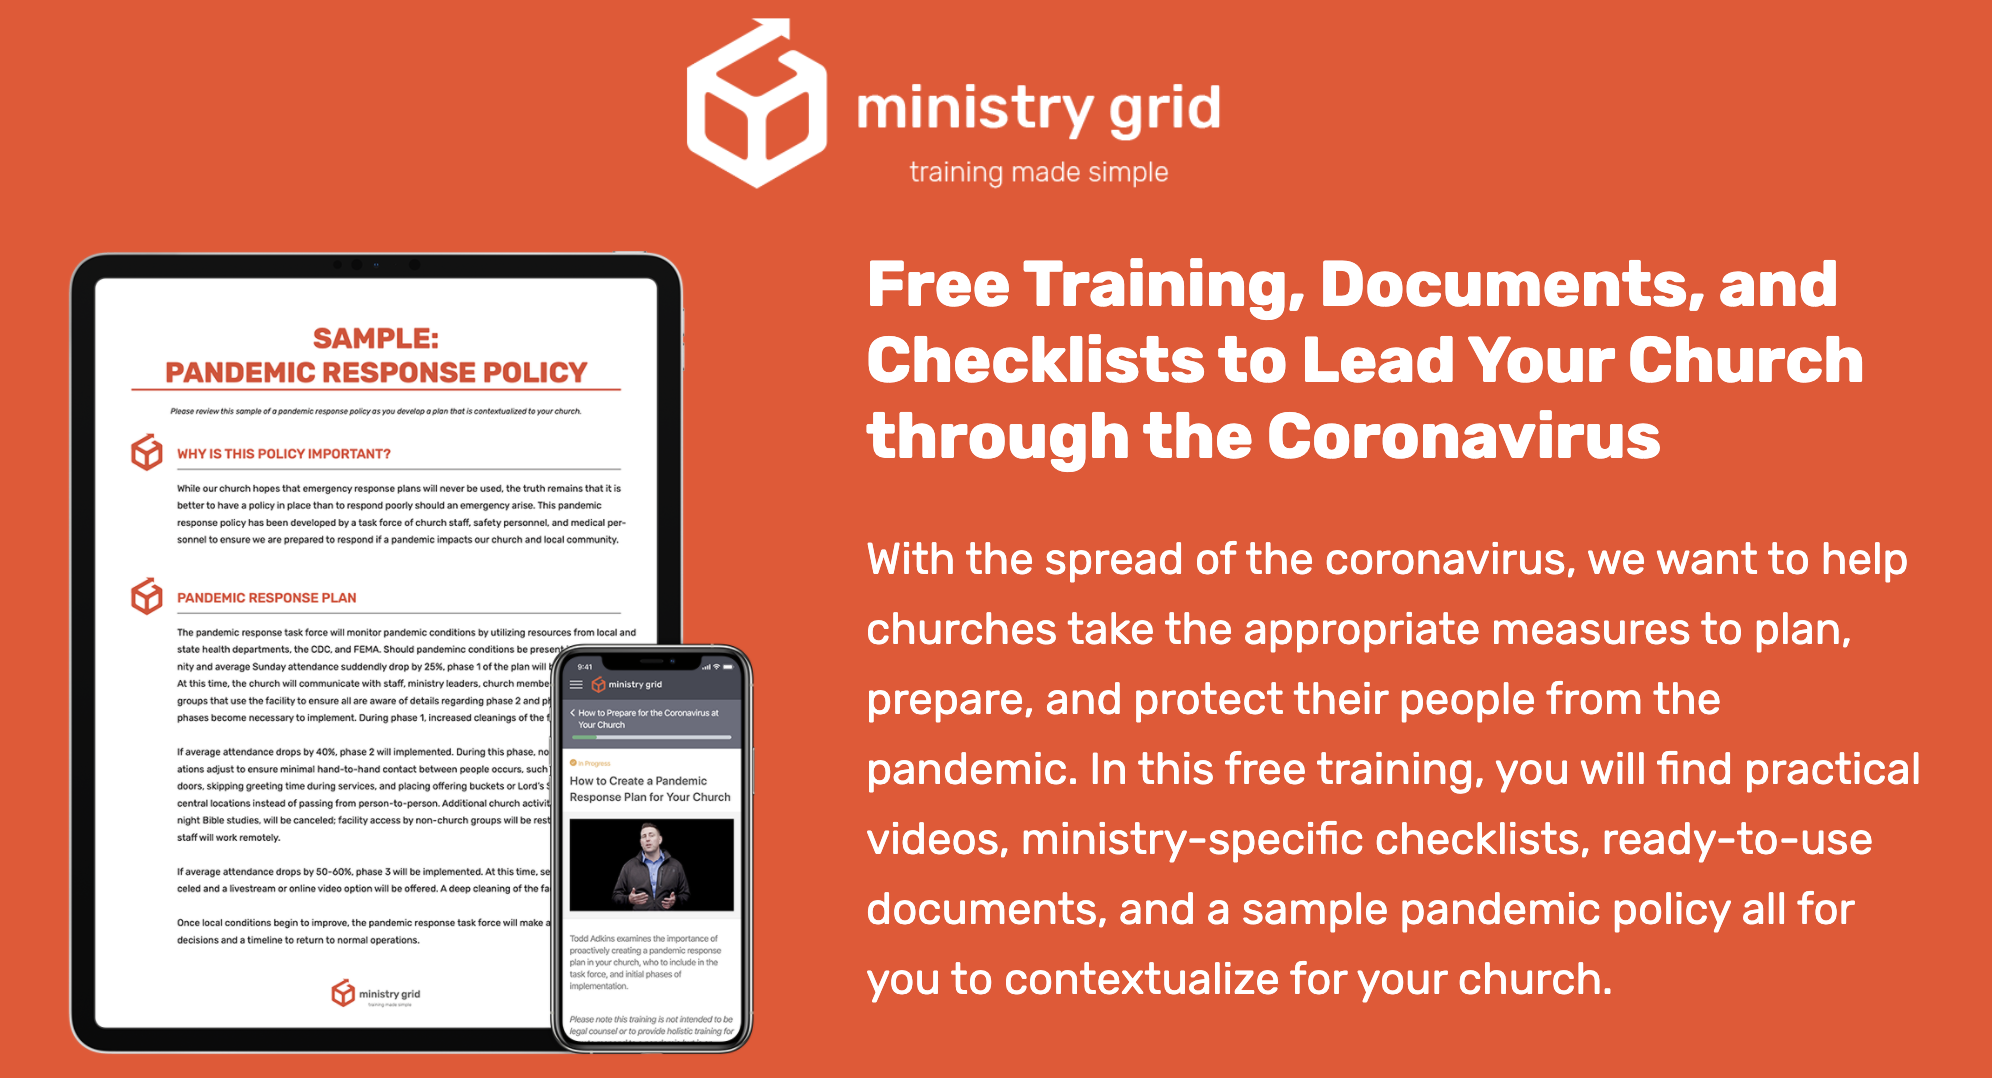 Ministry Grid